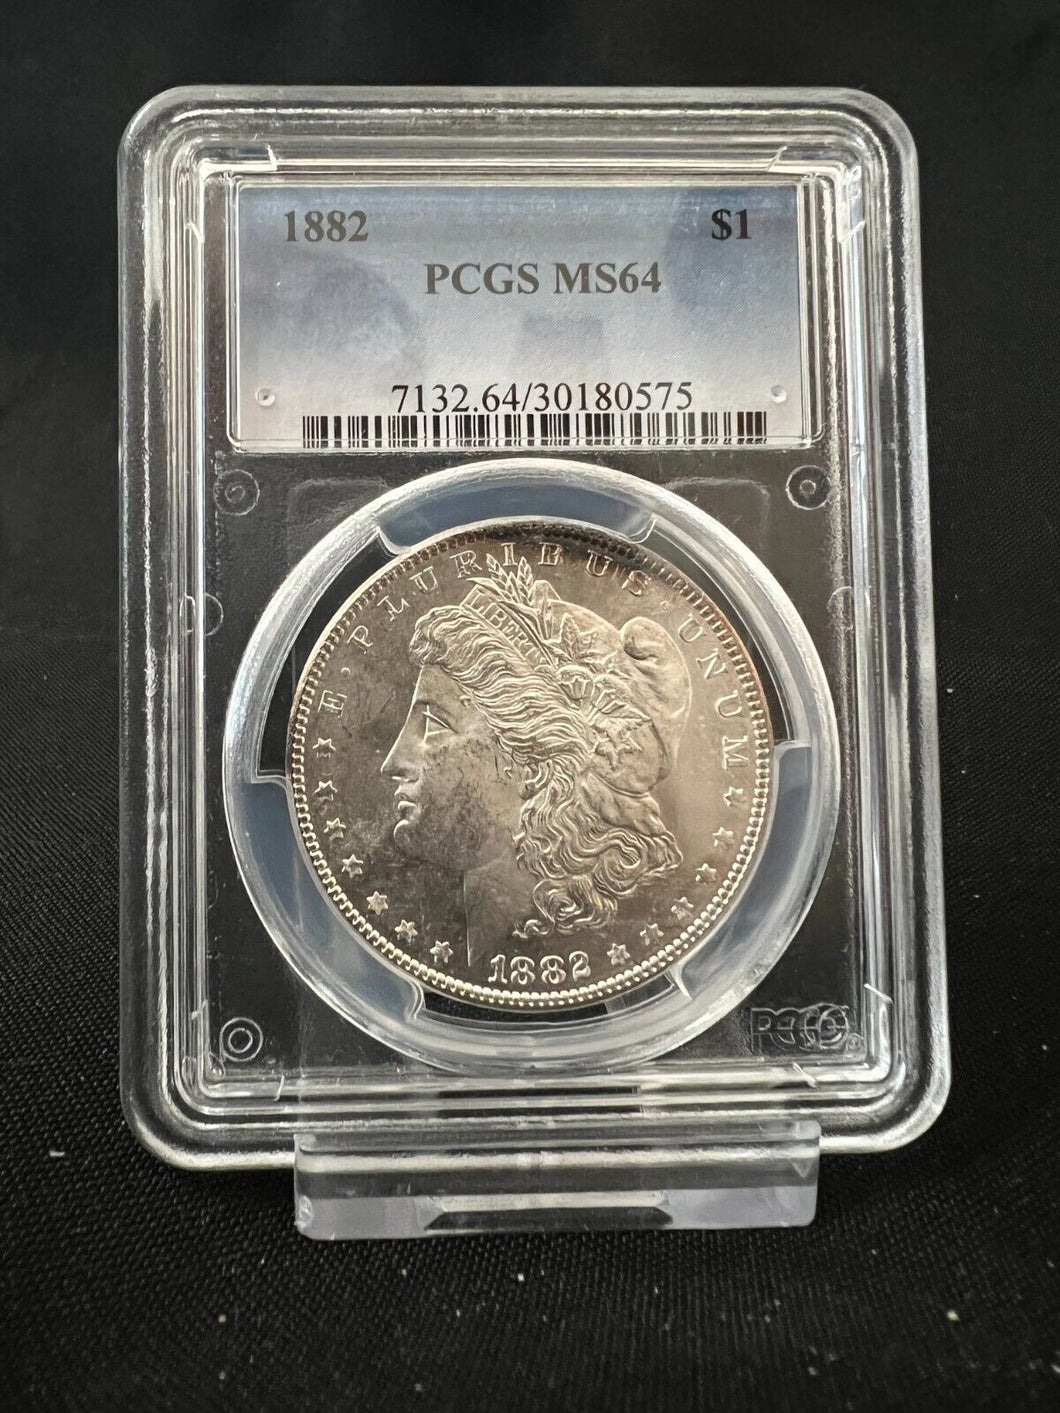 1882-P $1 Morgan Silver Dollar PCGS MS64  Well struck and high end 64